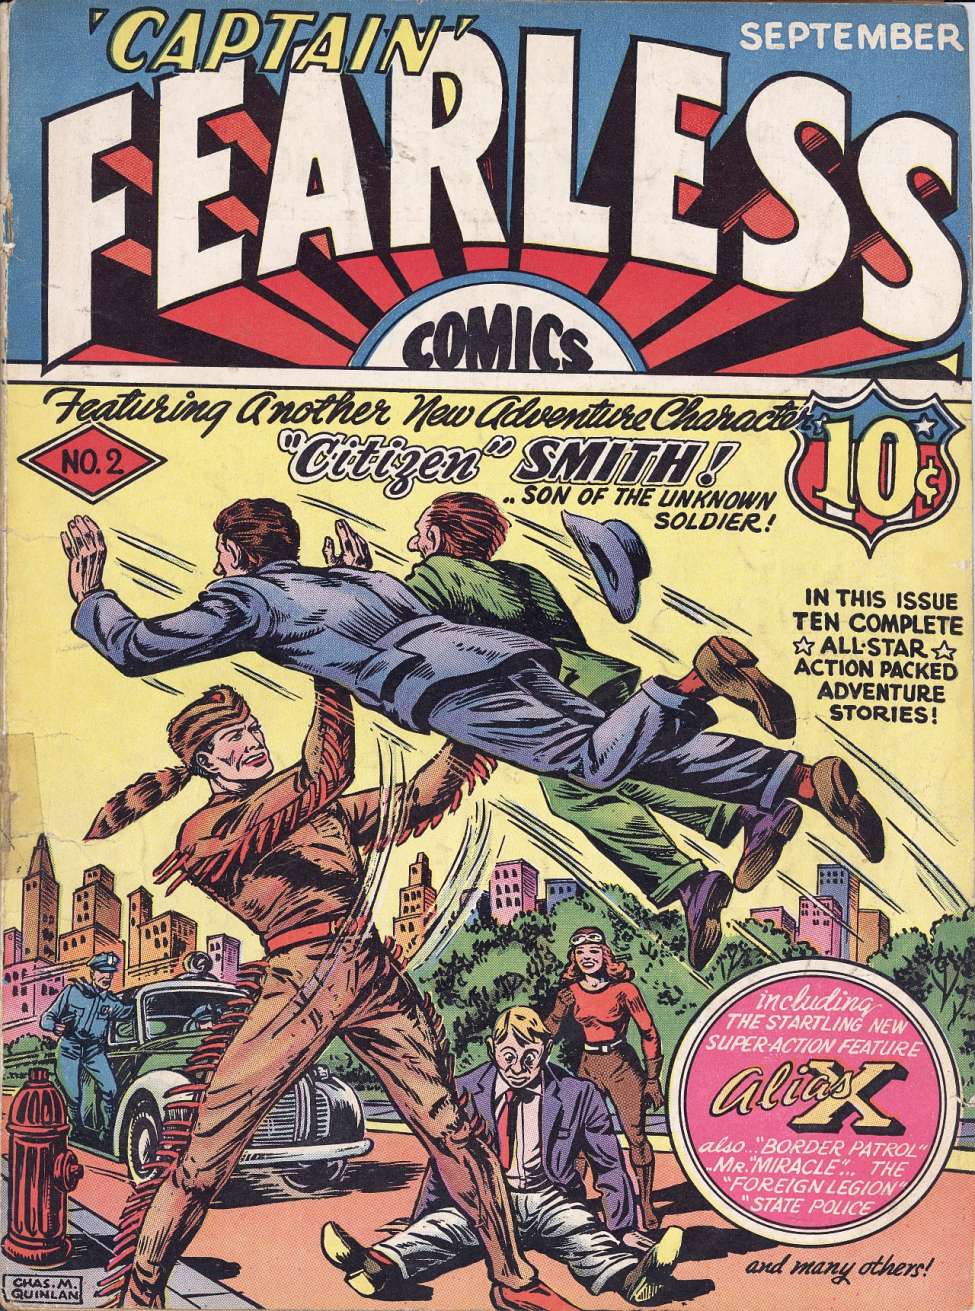 Book Cover For Captain Fearless Comics 2